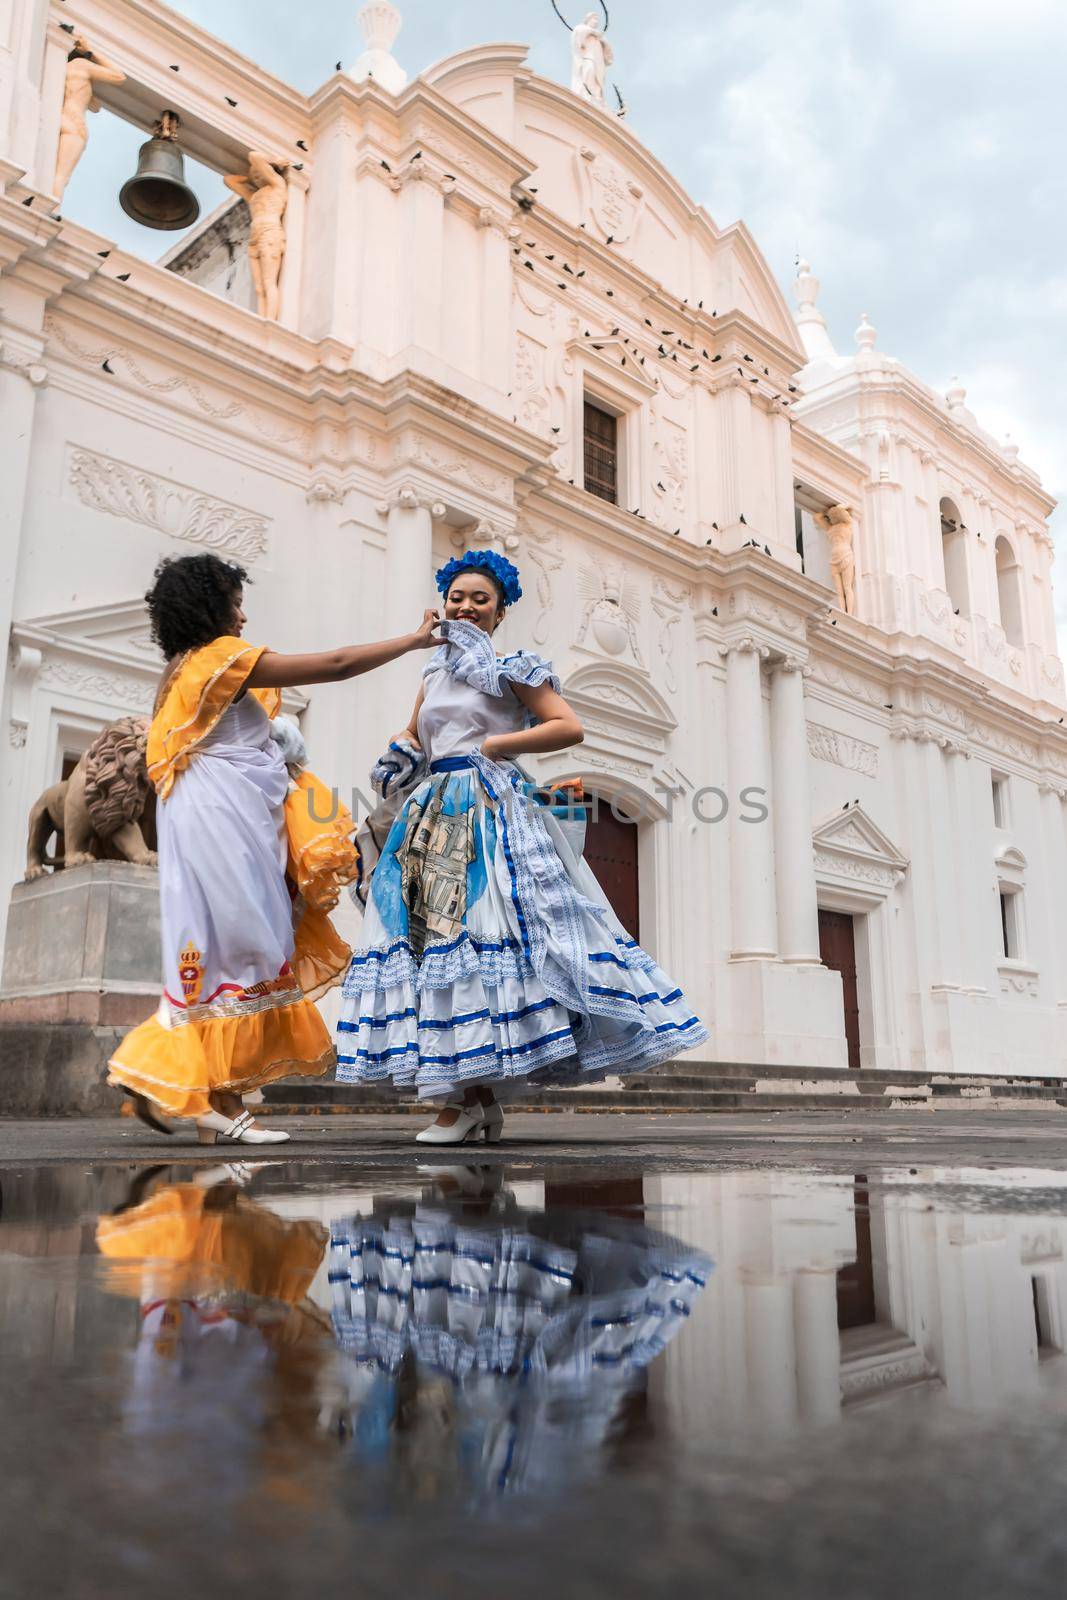 Traditional Nicaraguan folklore dancers fixing their dresses in front of the cathedral church in Leon Nicaragua.